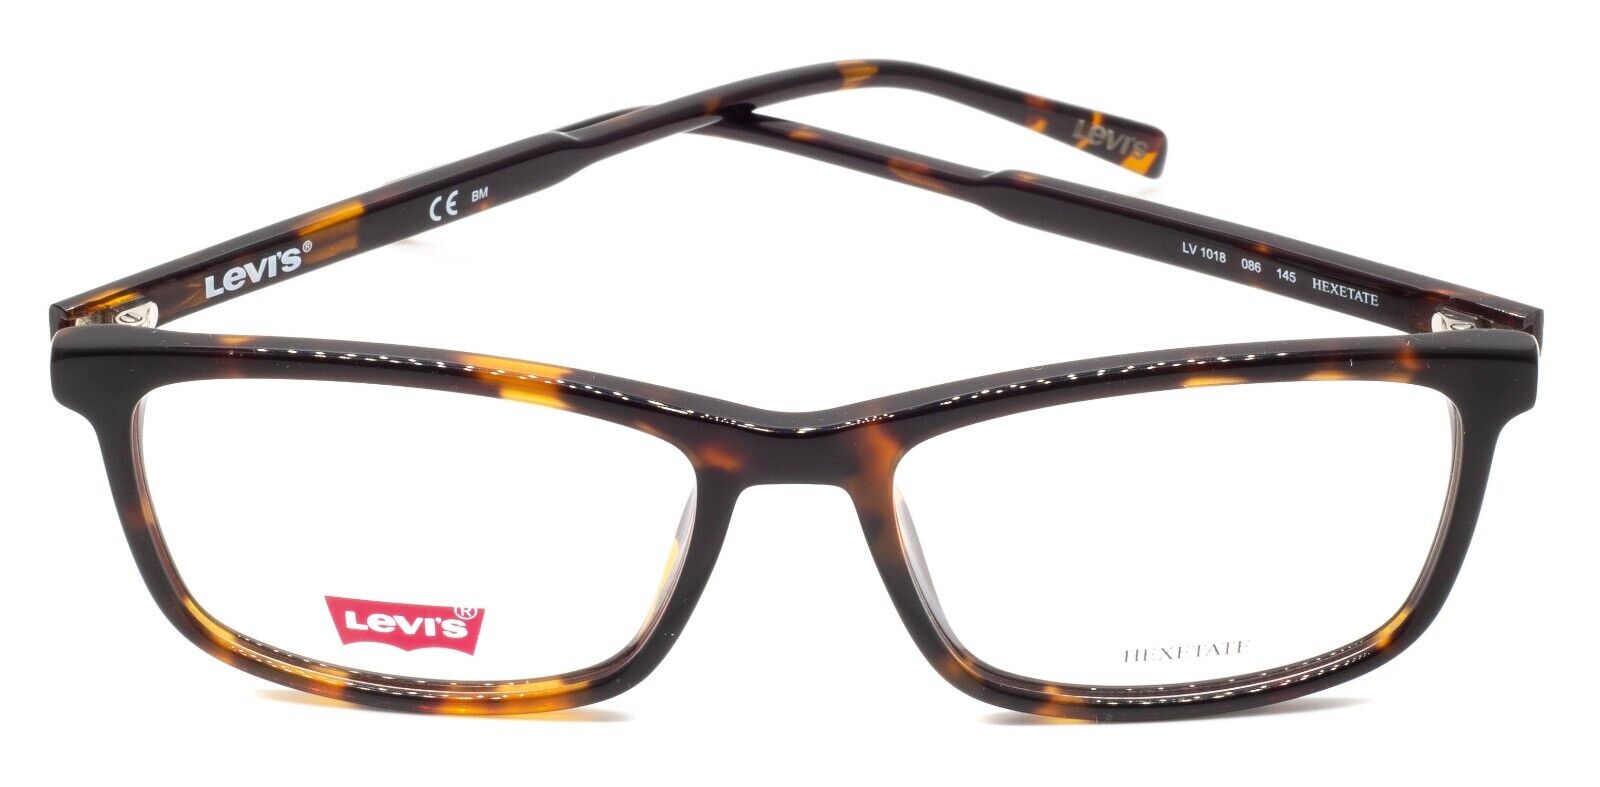 Levis Lv 1015 Eyeglasses  FREE Shipping -  - SOLD OUT